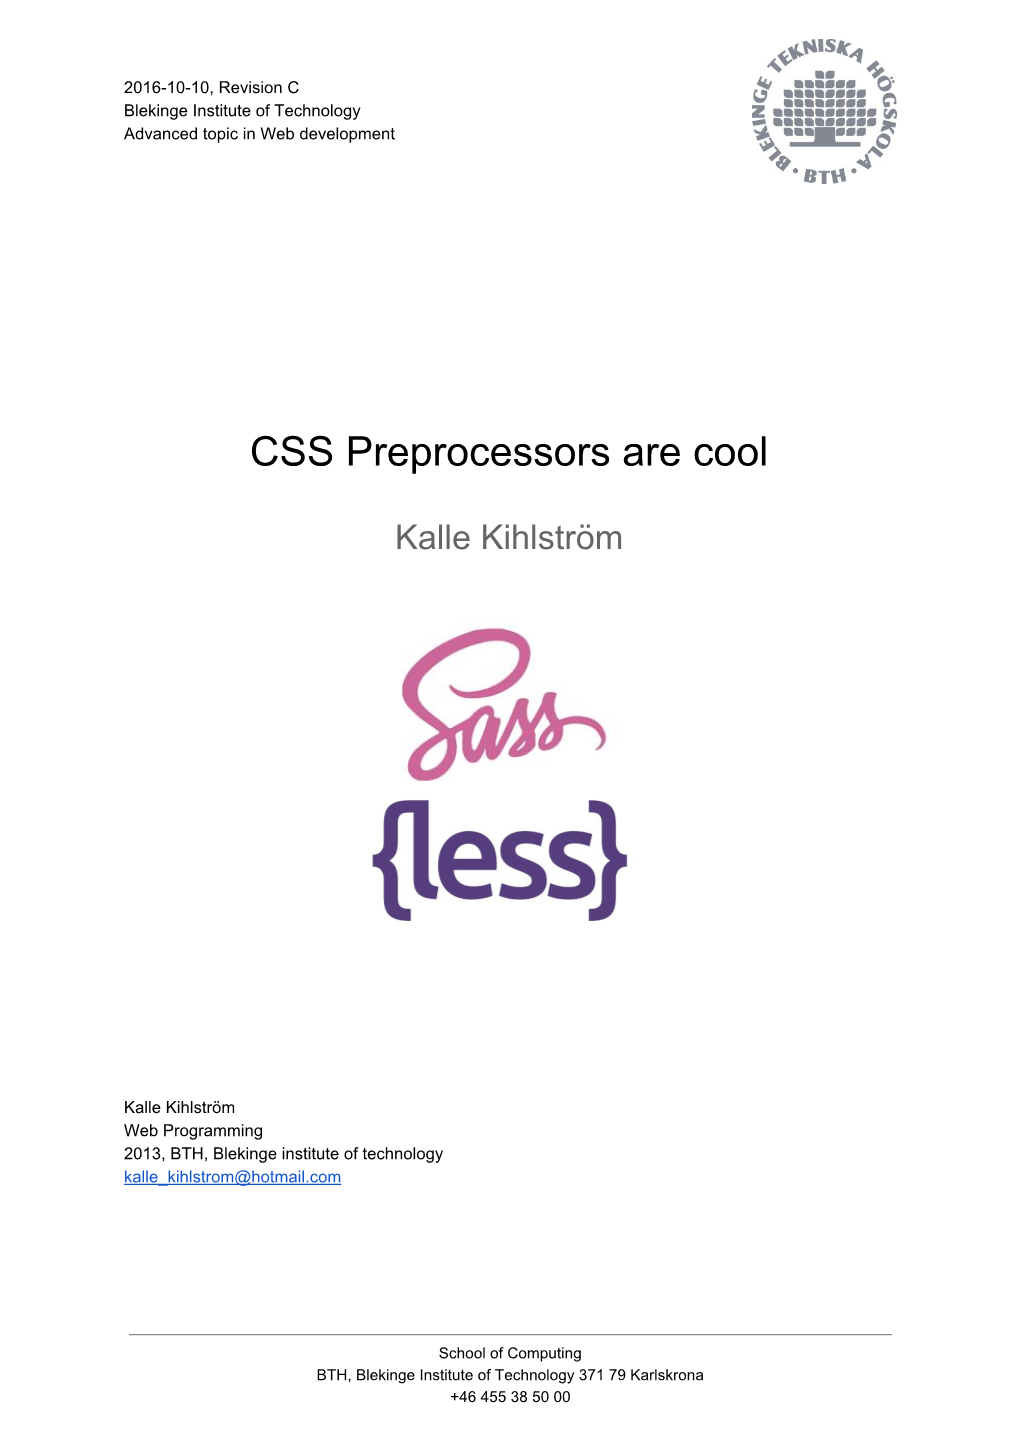 CSS Preprocessors Are Cool